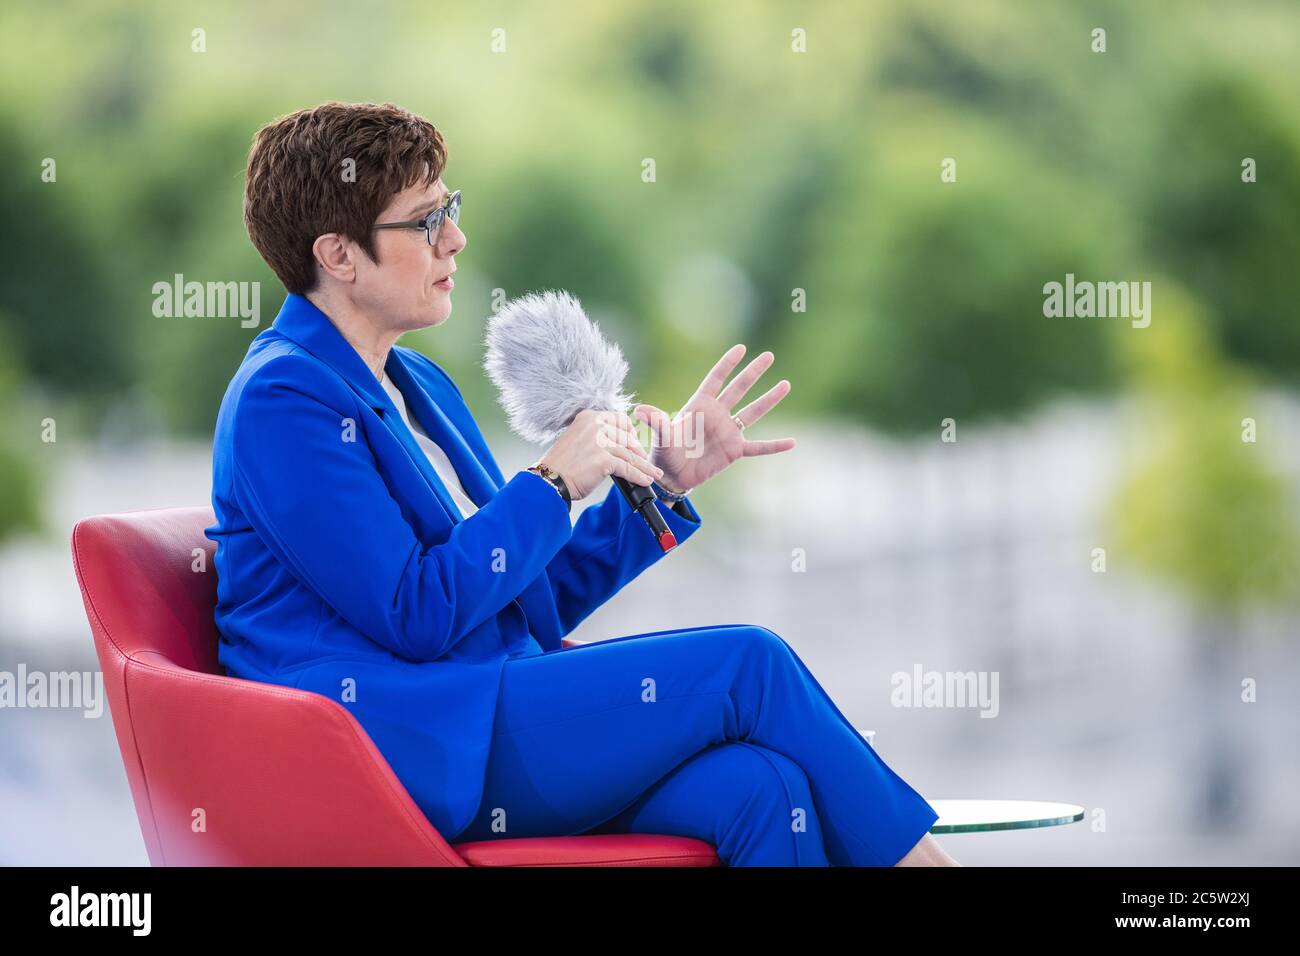 Berlin, Germany. 05th July, 2020. Annegret Kramp-Karrenbauer (CDU), Federal Minister of Defense and CDU Federal Chairwoman, answers the questions of moderator Hassel in the ARD summer interview. Credit: Christophe Gateau/dpa/Alamy Live News Stock Photo